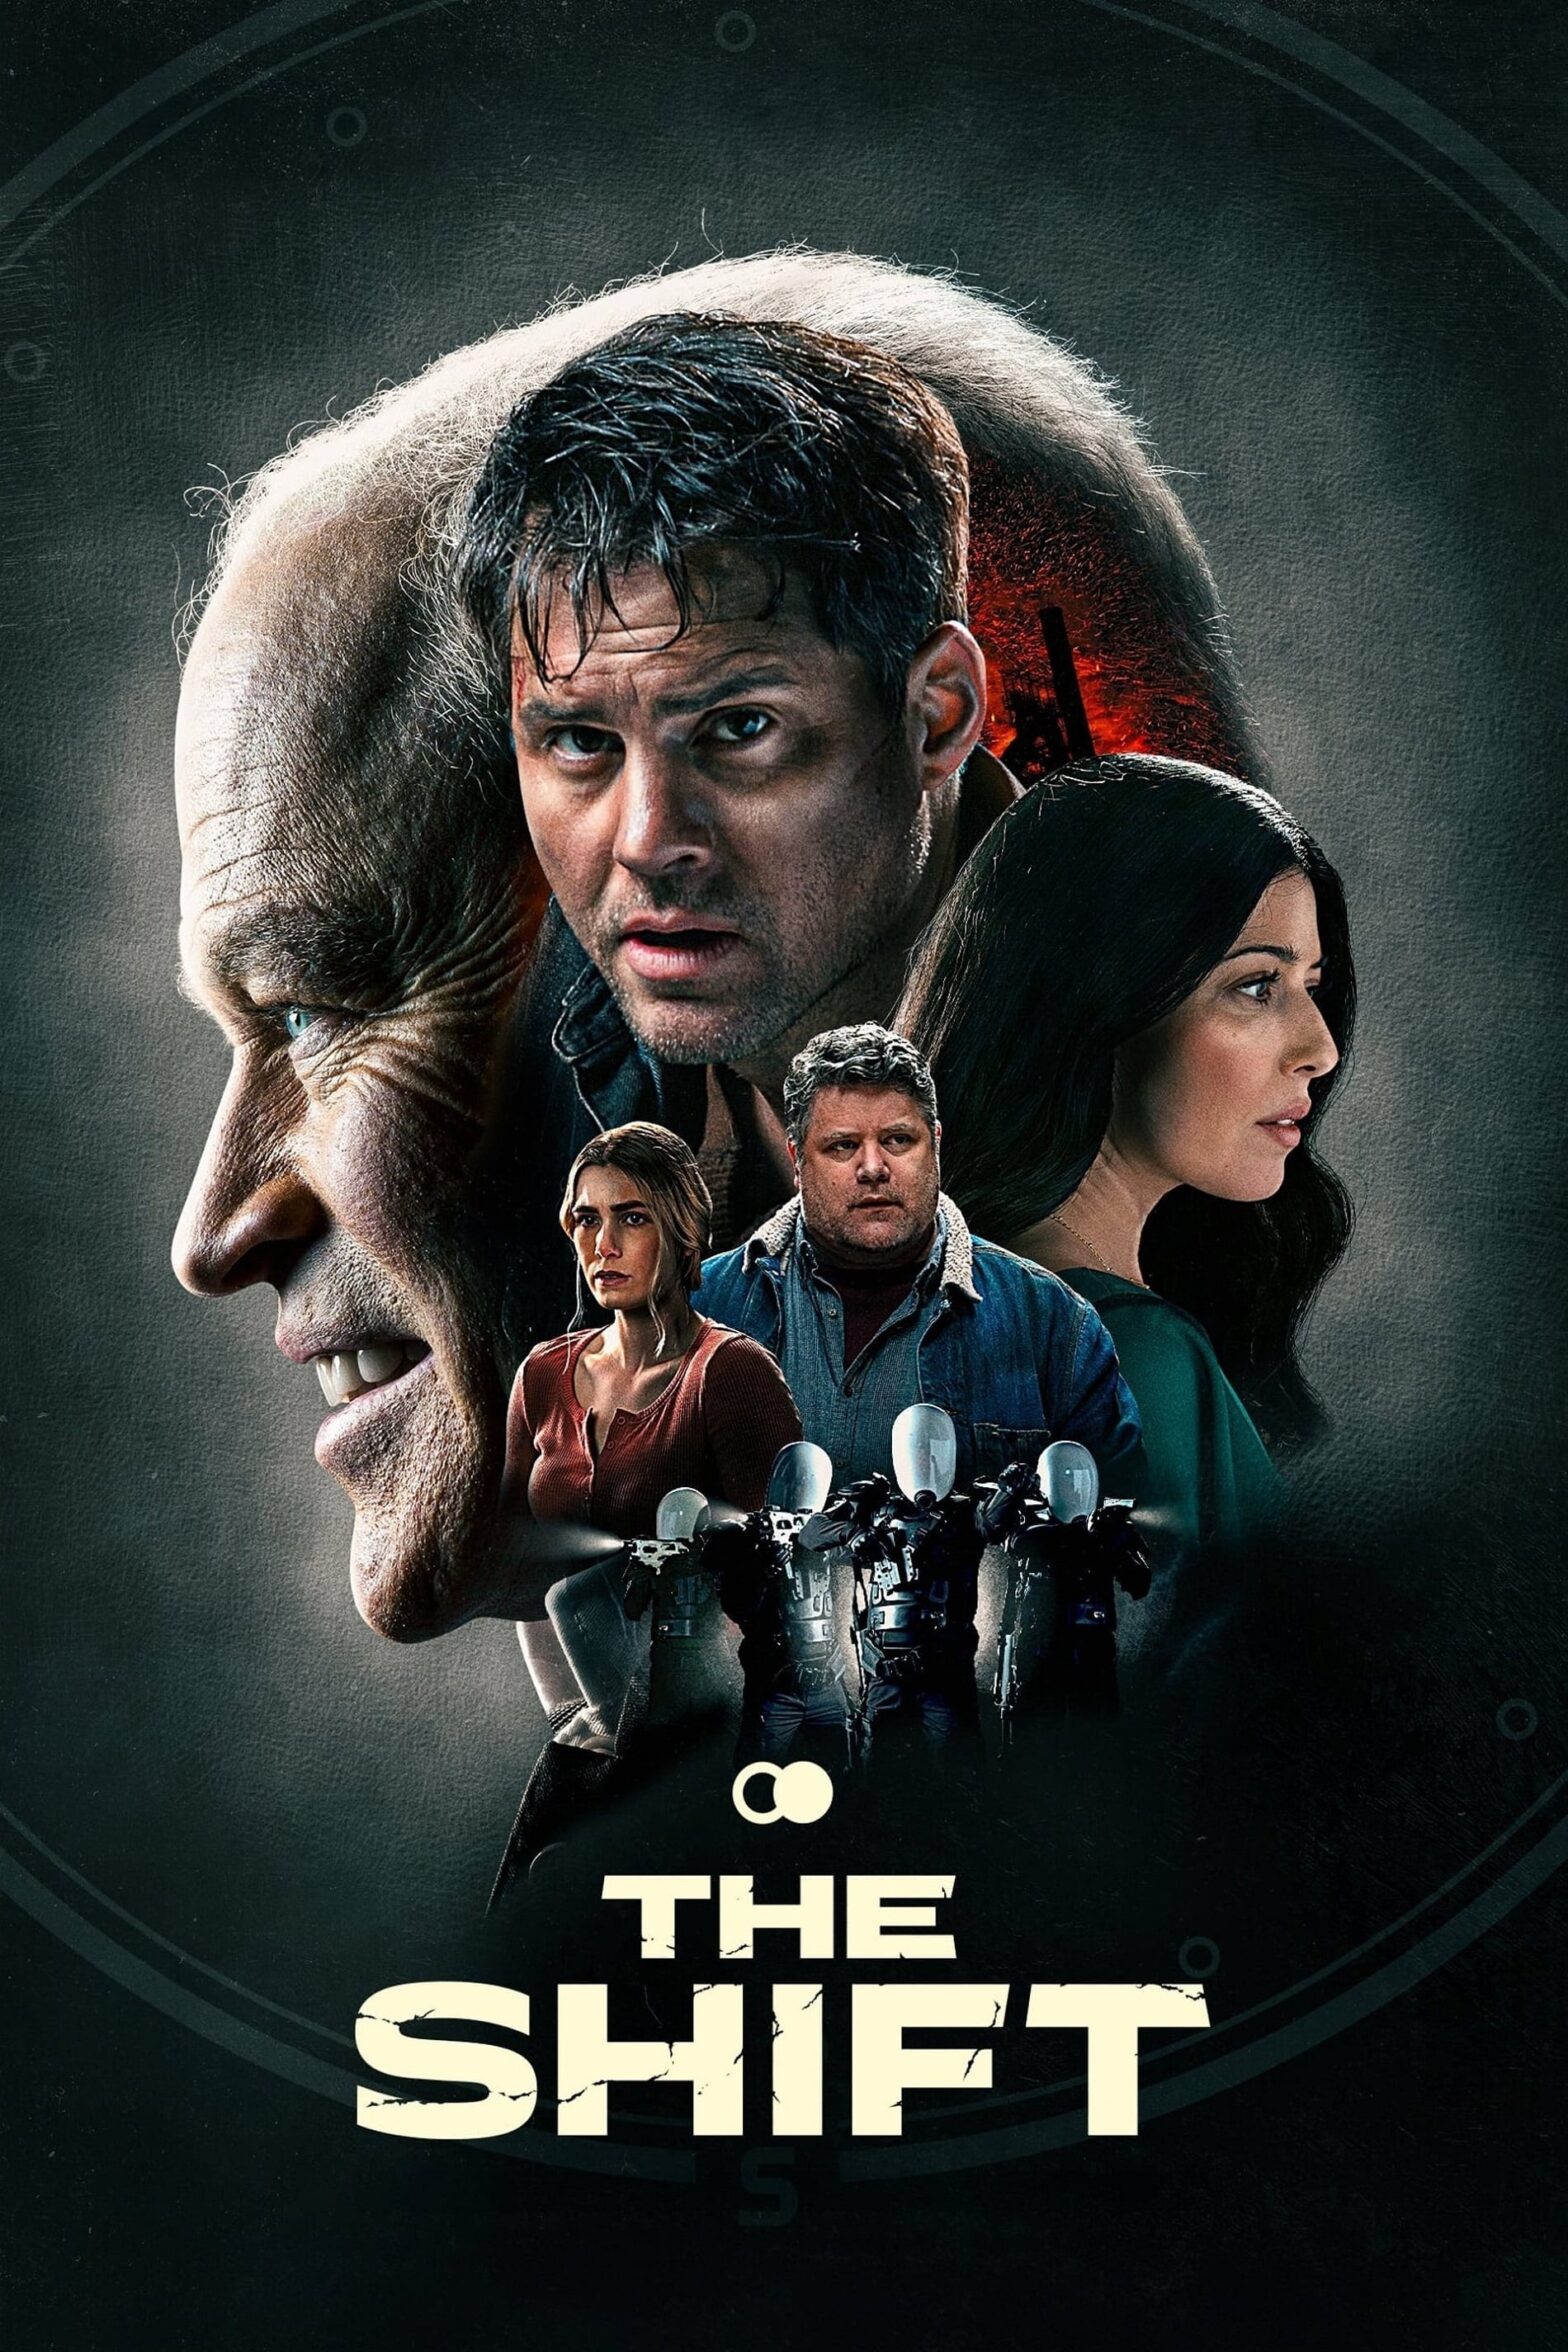 Poster for the movie "The Shift"